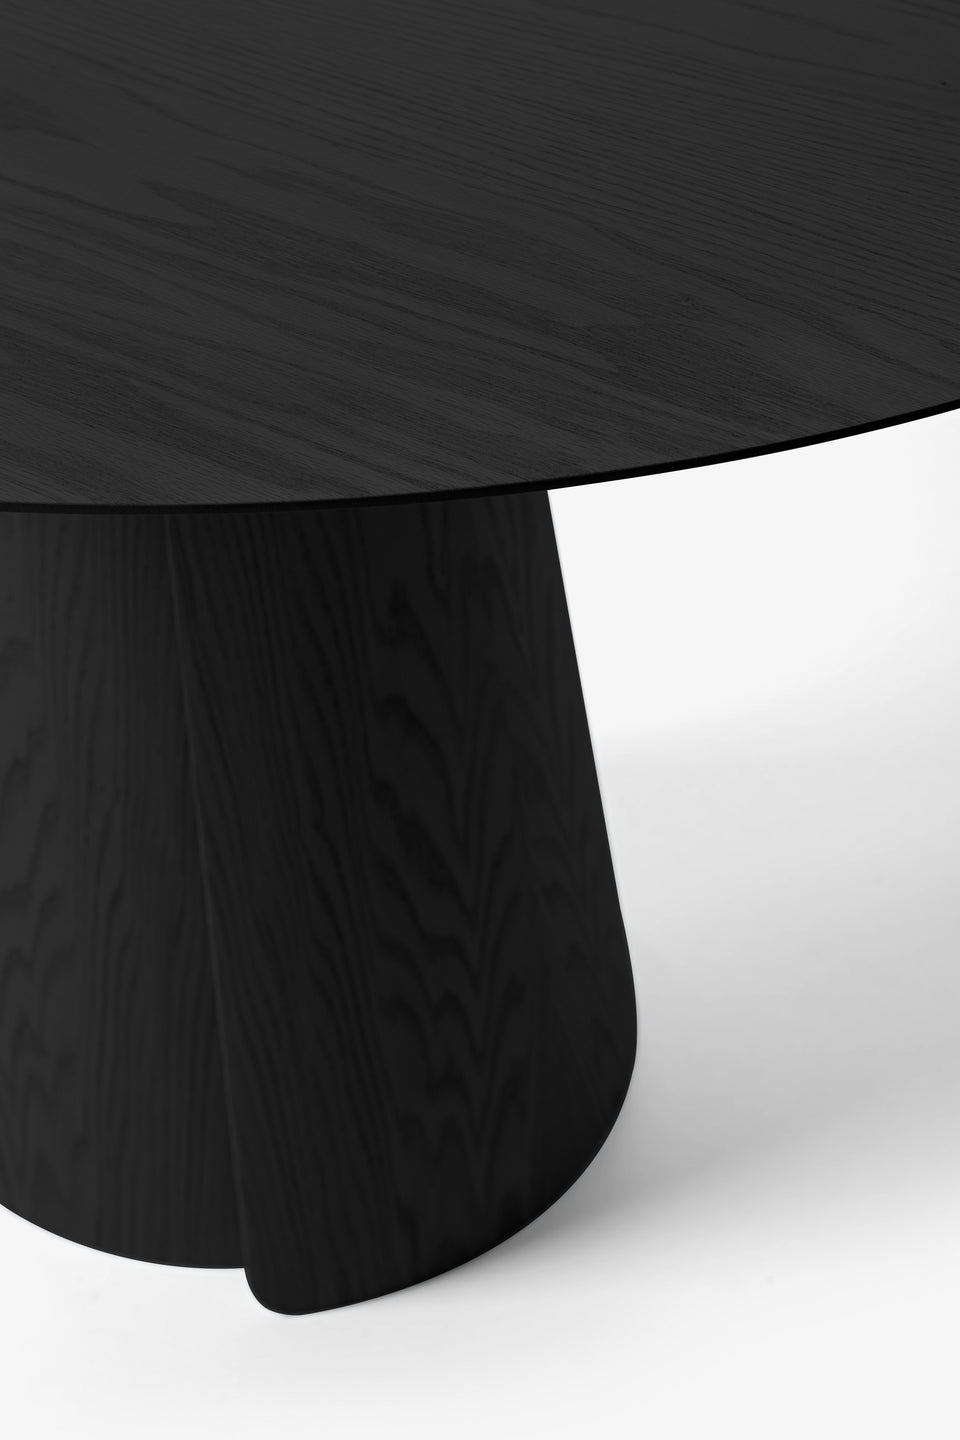 VOLTA DINING TABLE IN BLACK